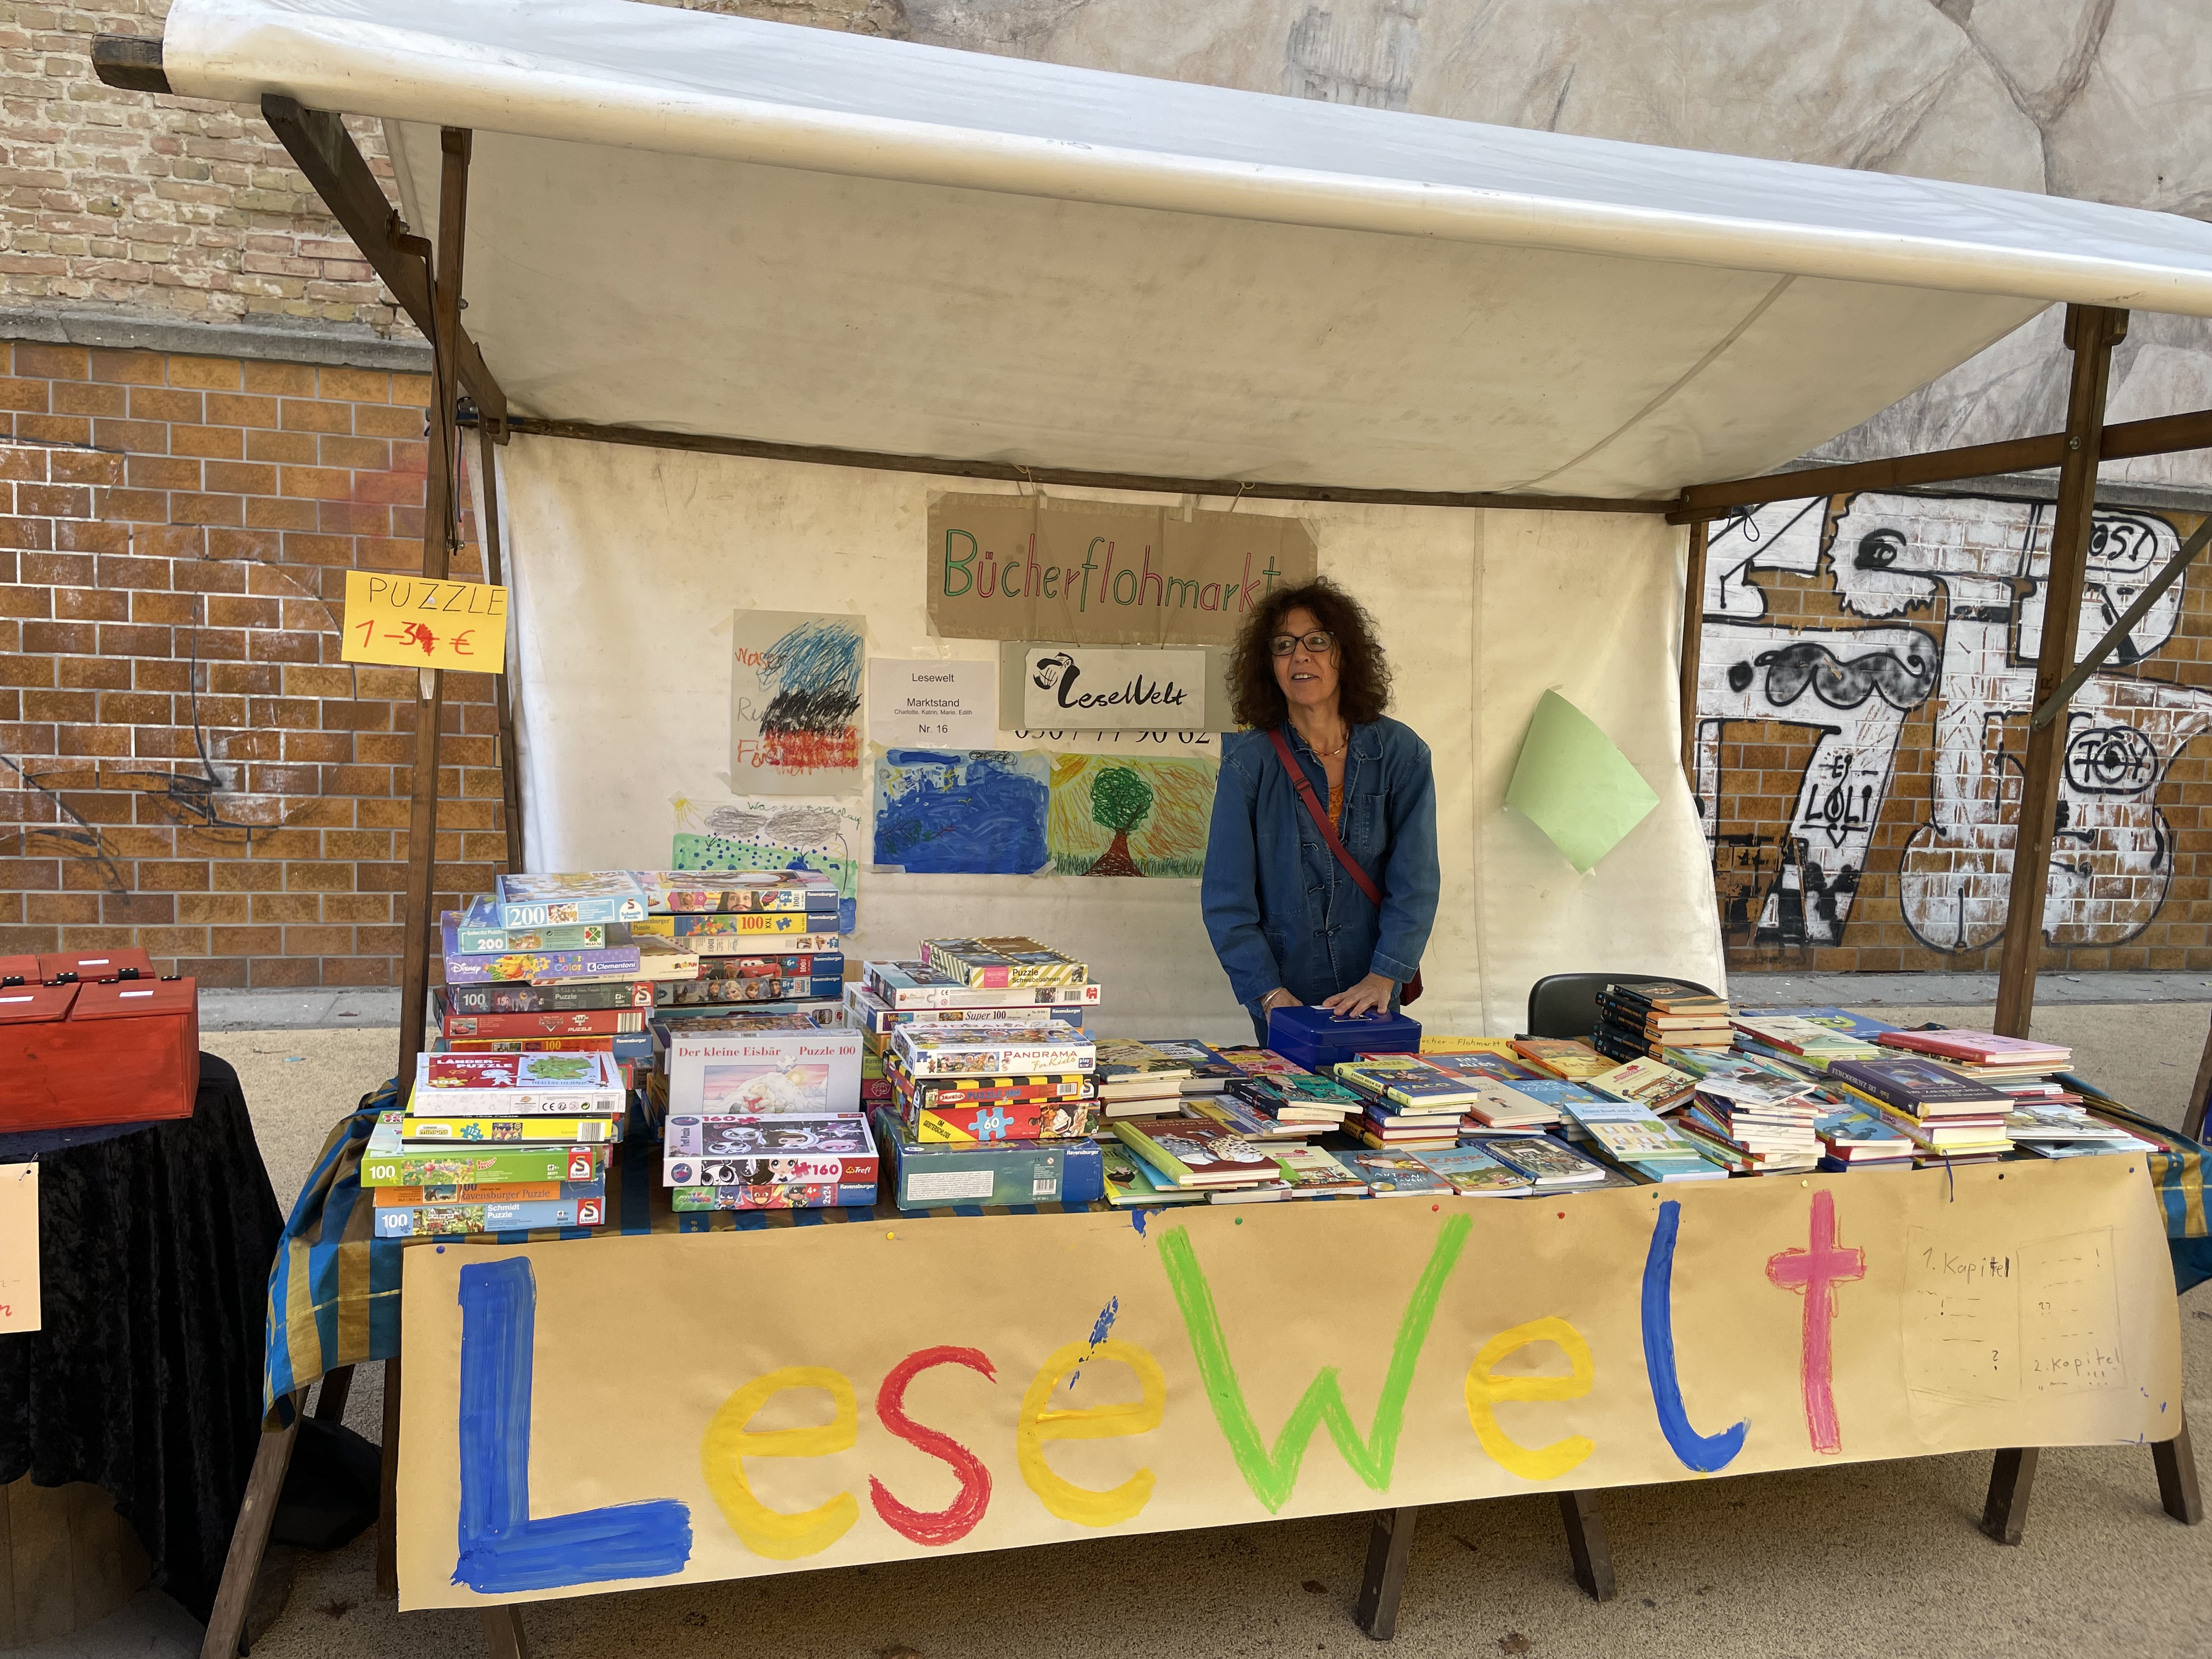 Stand: Lesewelt.